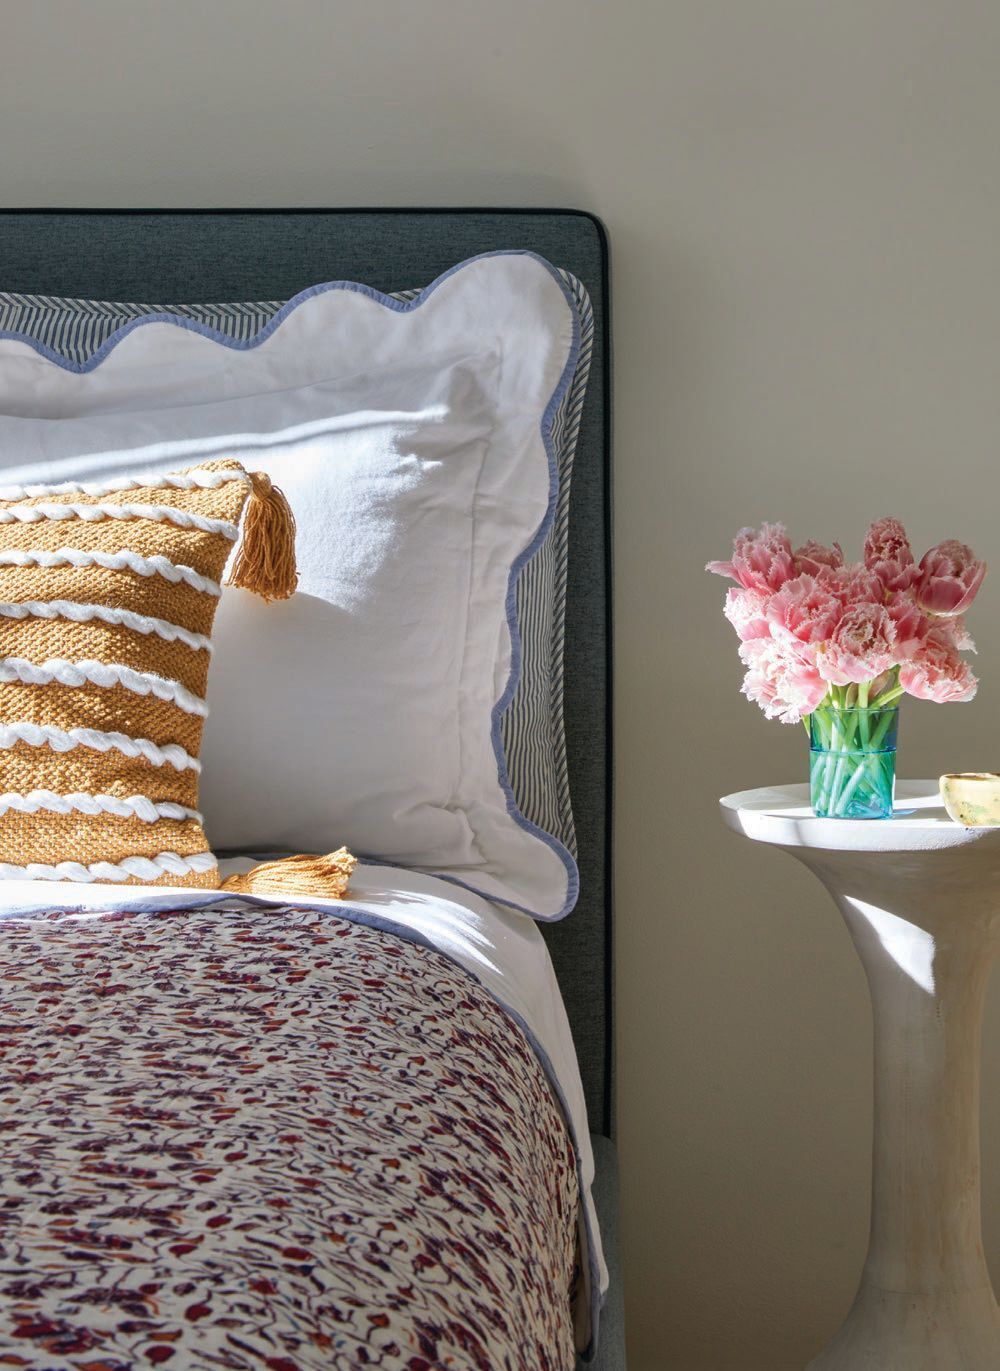 The guest bedroom is cozy with Ballard Designs bedding and a Crate & Barrel bed  PHOTOGRAPHED BY KIRSTEN FRANCIS